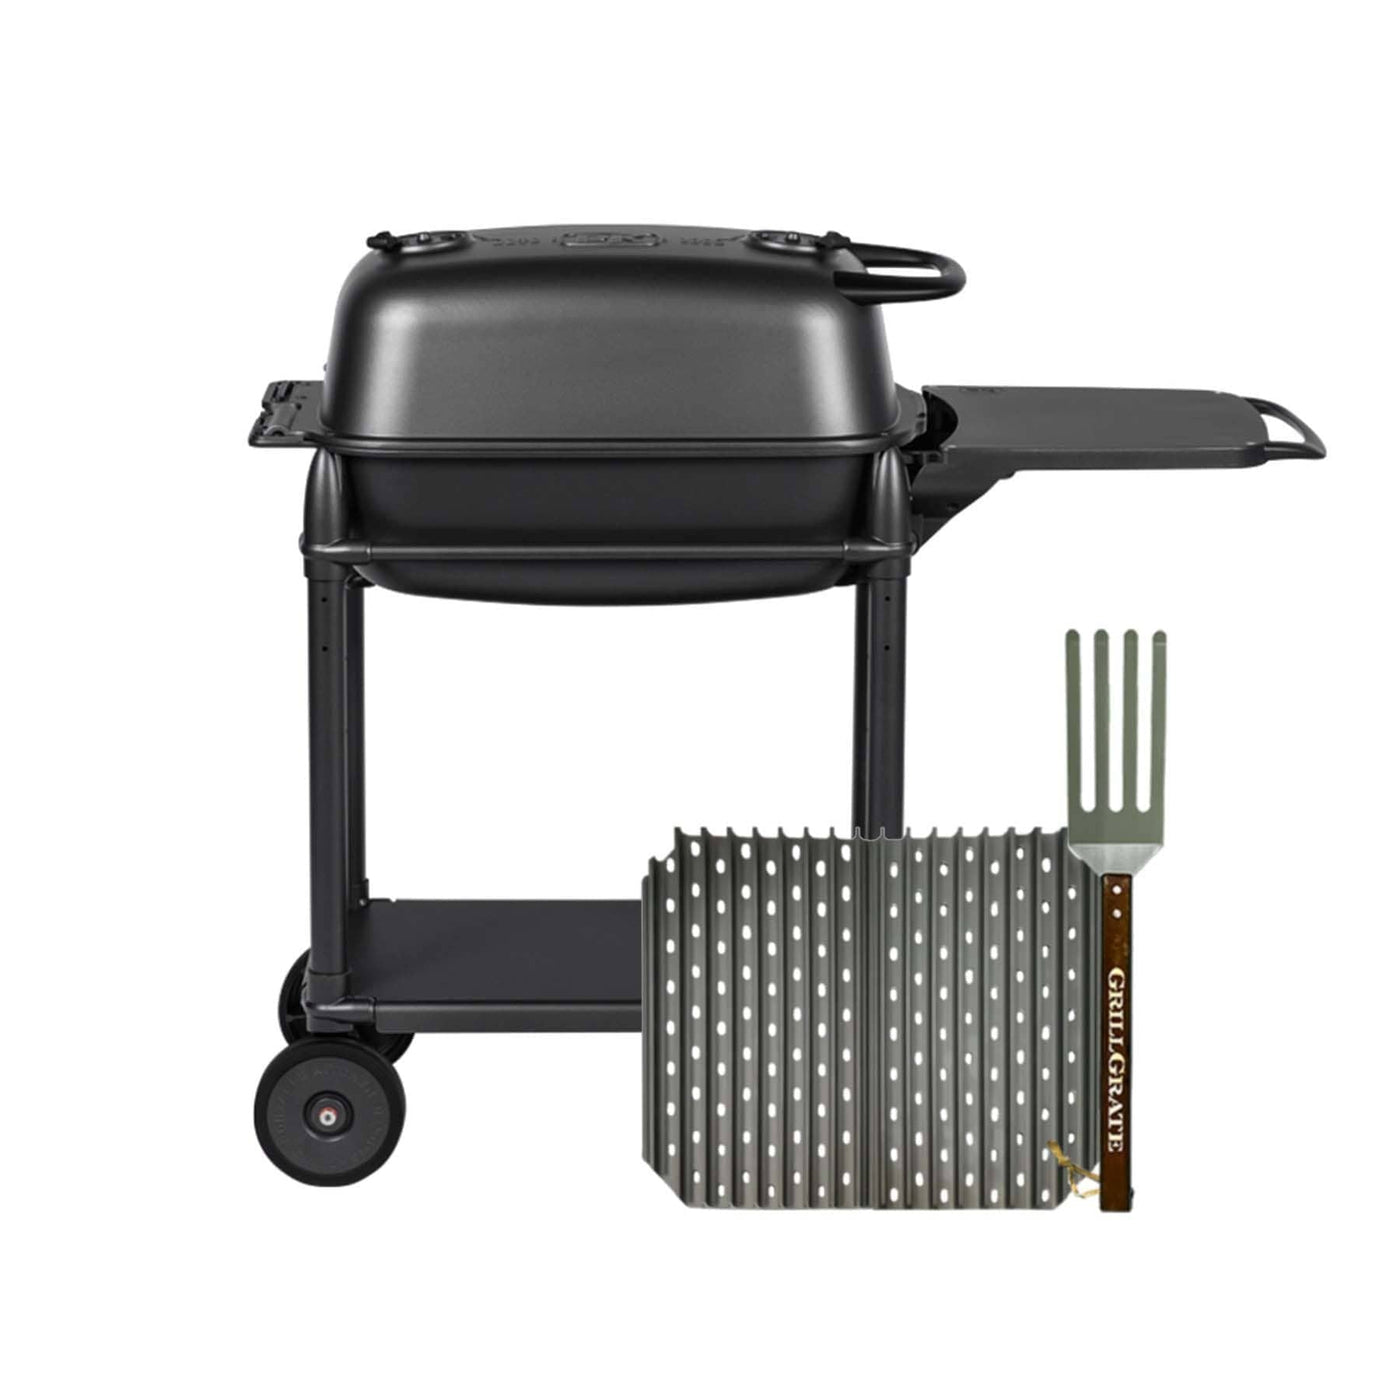 PK 300 grill by PK Grills, rack and grilling fork